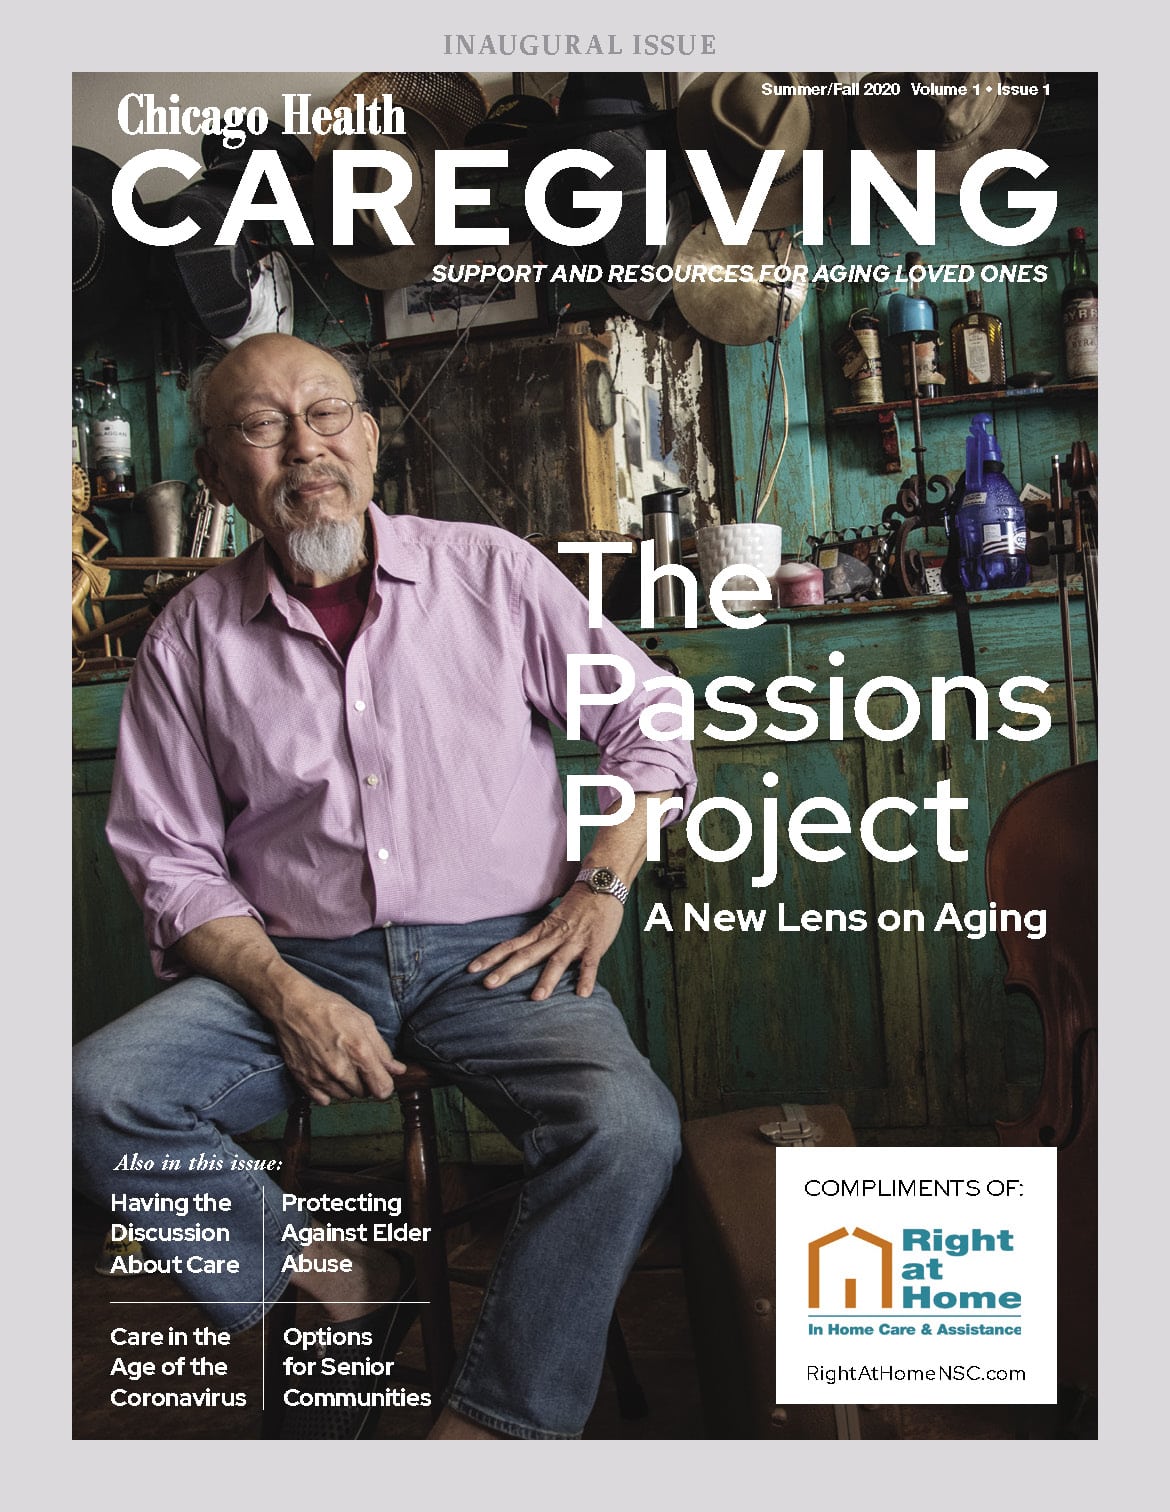 Right at Home custom cover for Caregiving magazine